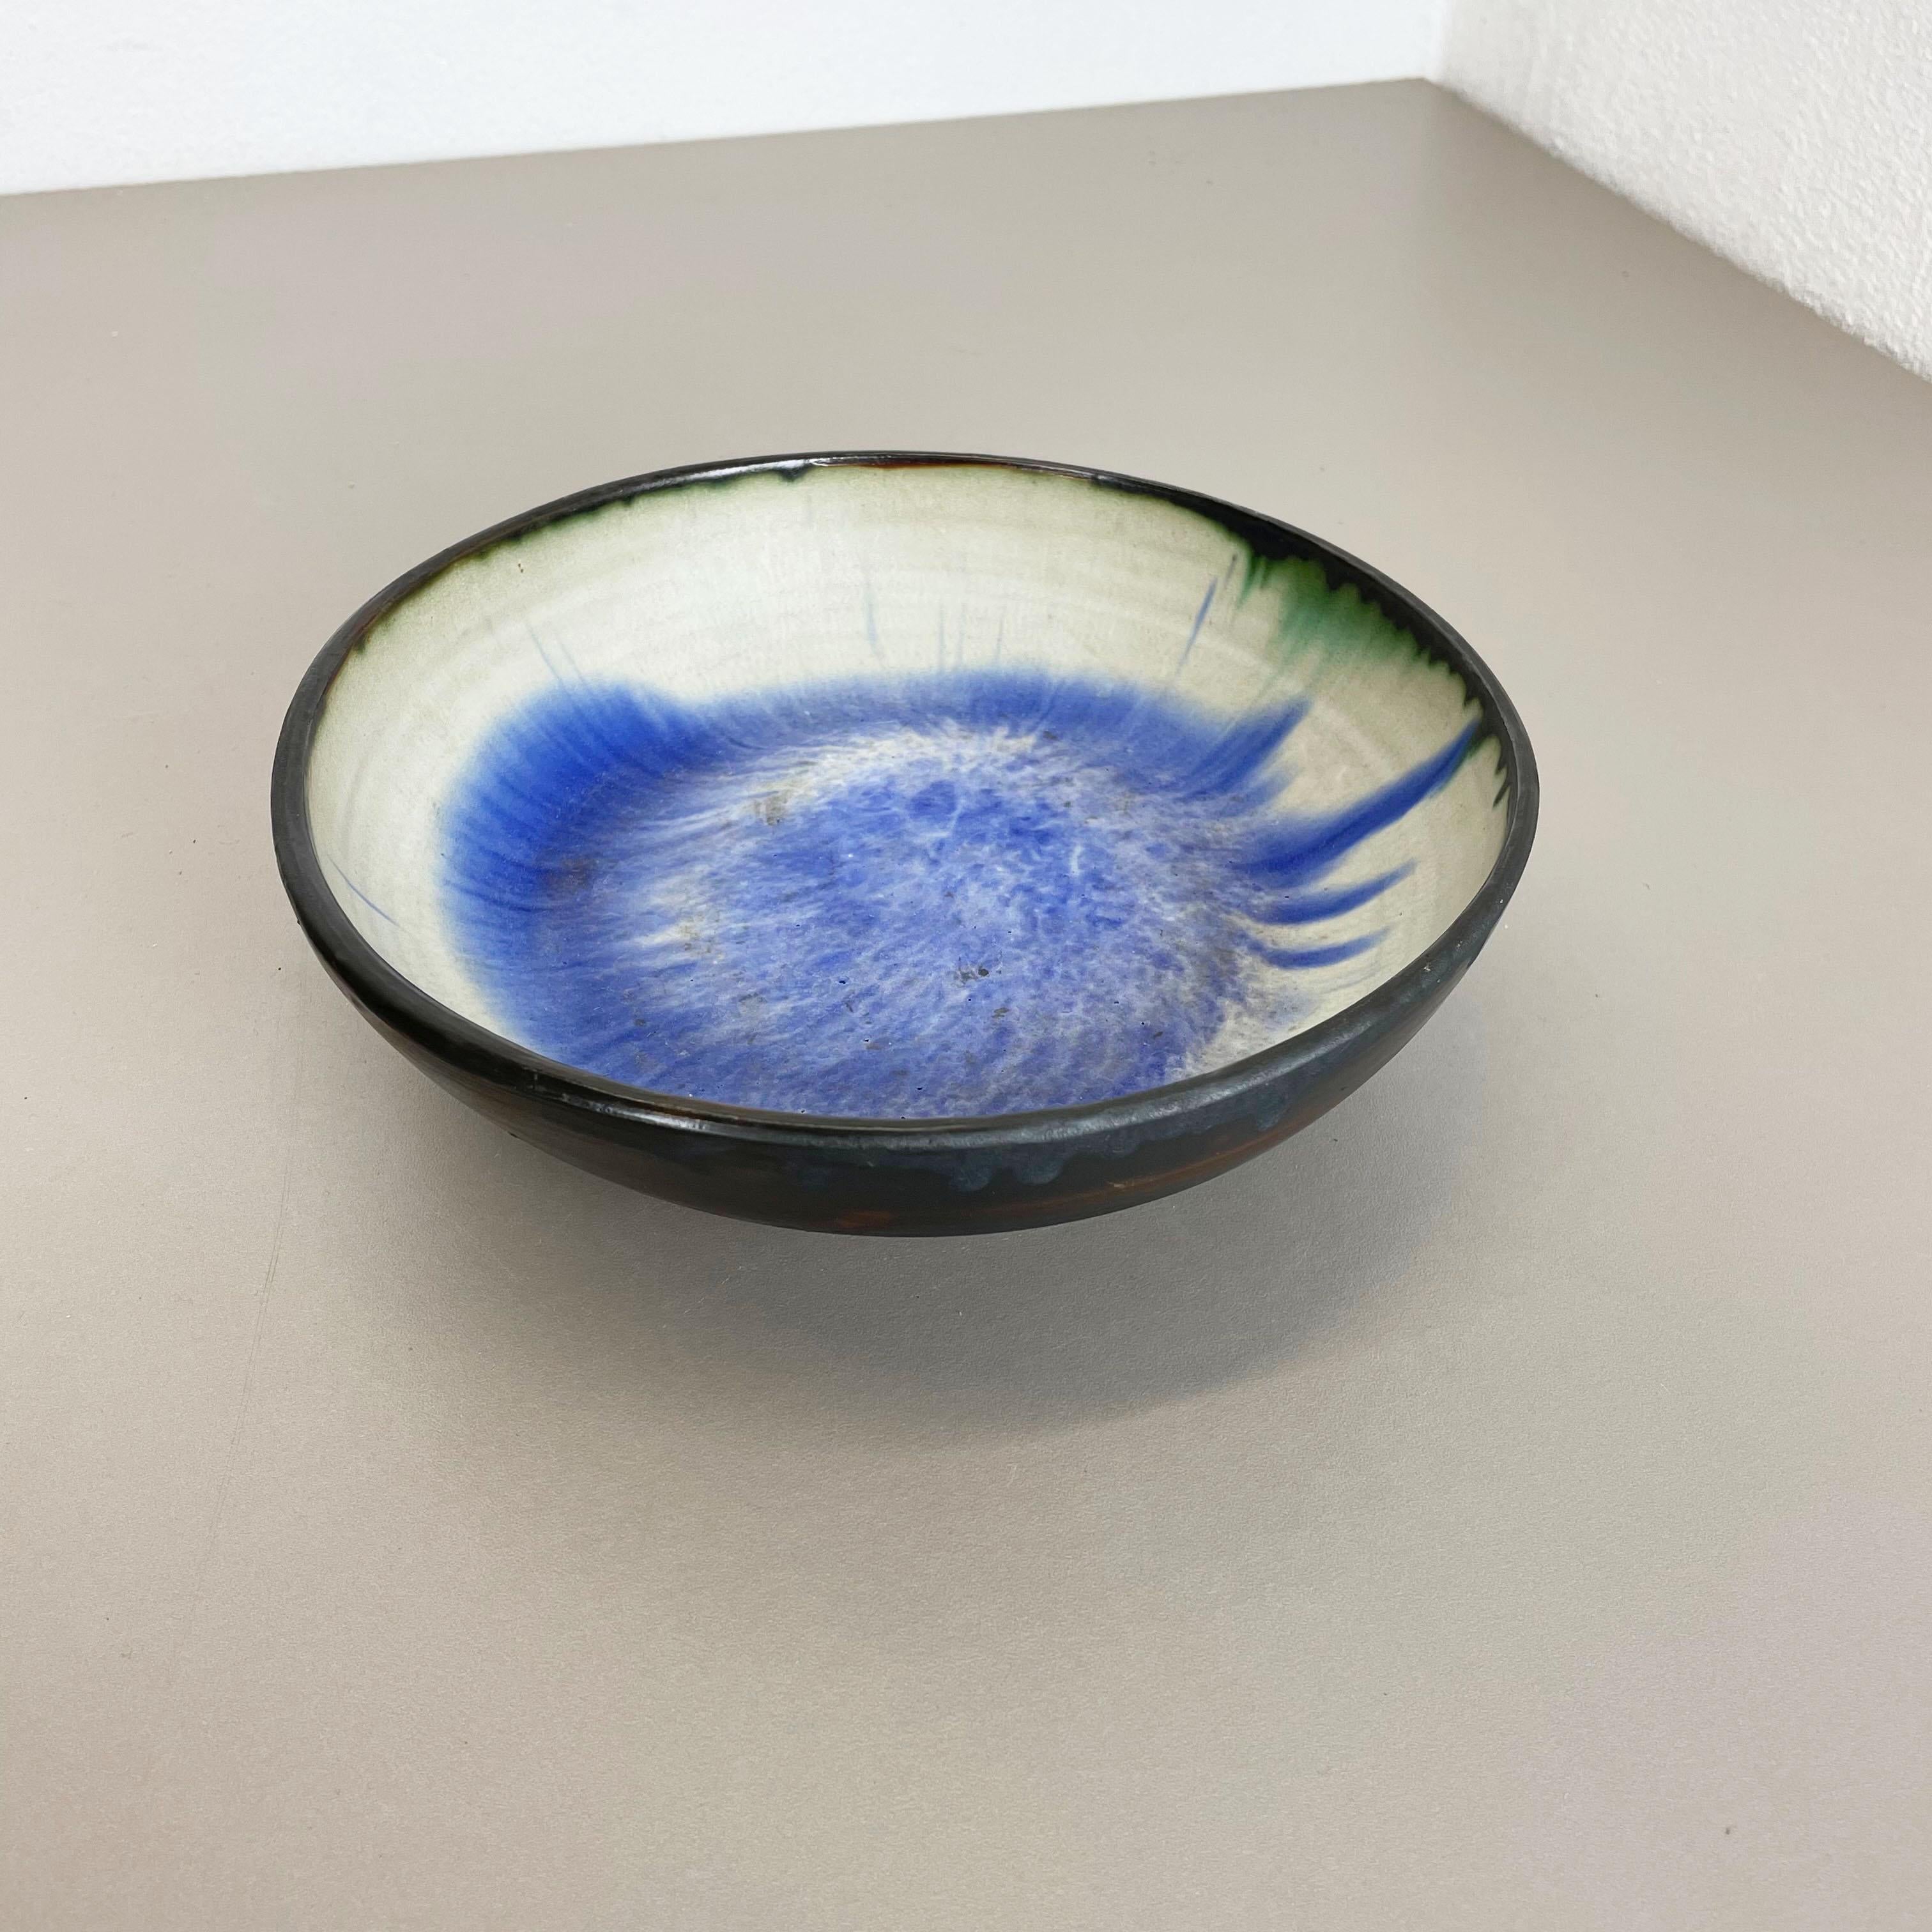 Ceramic Studio Pottery Bowl Shell Element by Gerhard Liebenthron, Germany, 1962 In Good Condition For Sale In Kirchlengern, DE